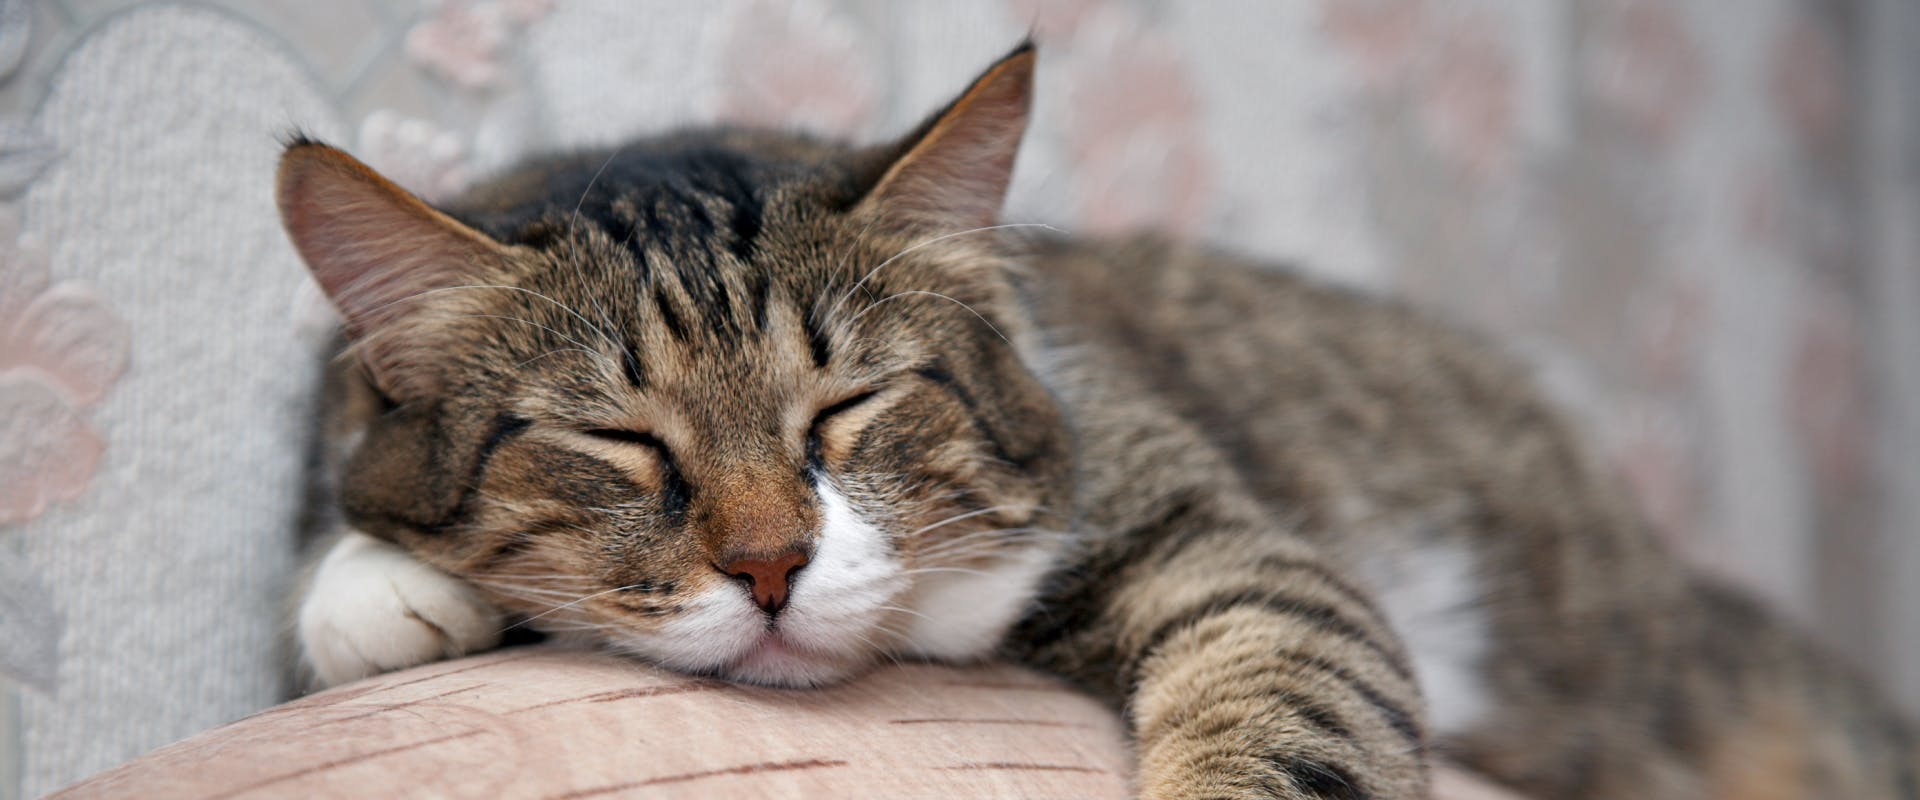 A cat snoozes on a cushion.